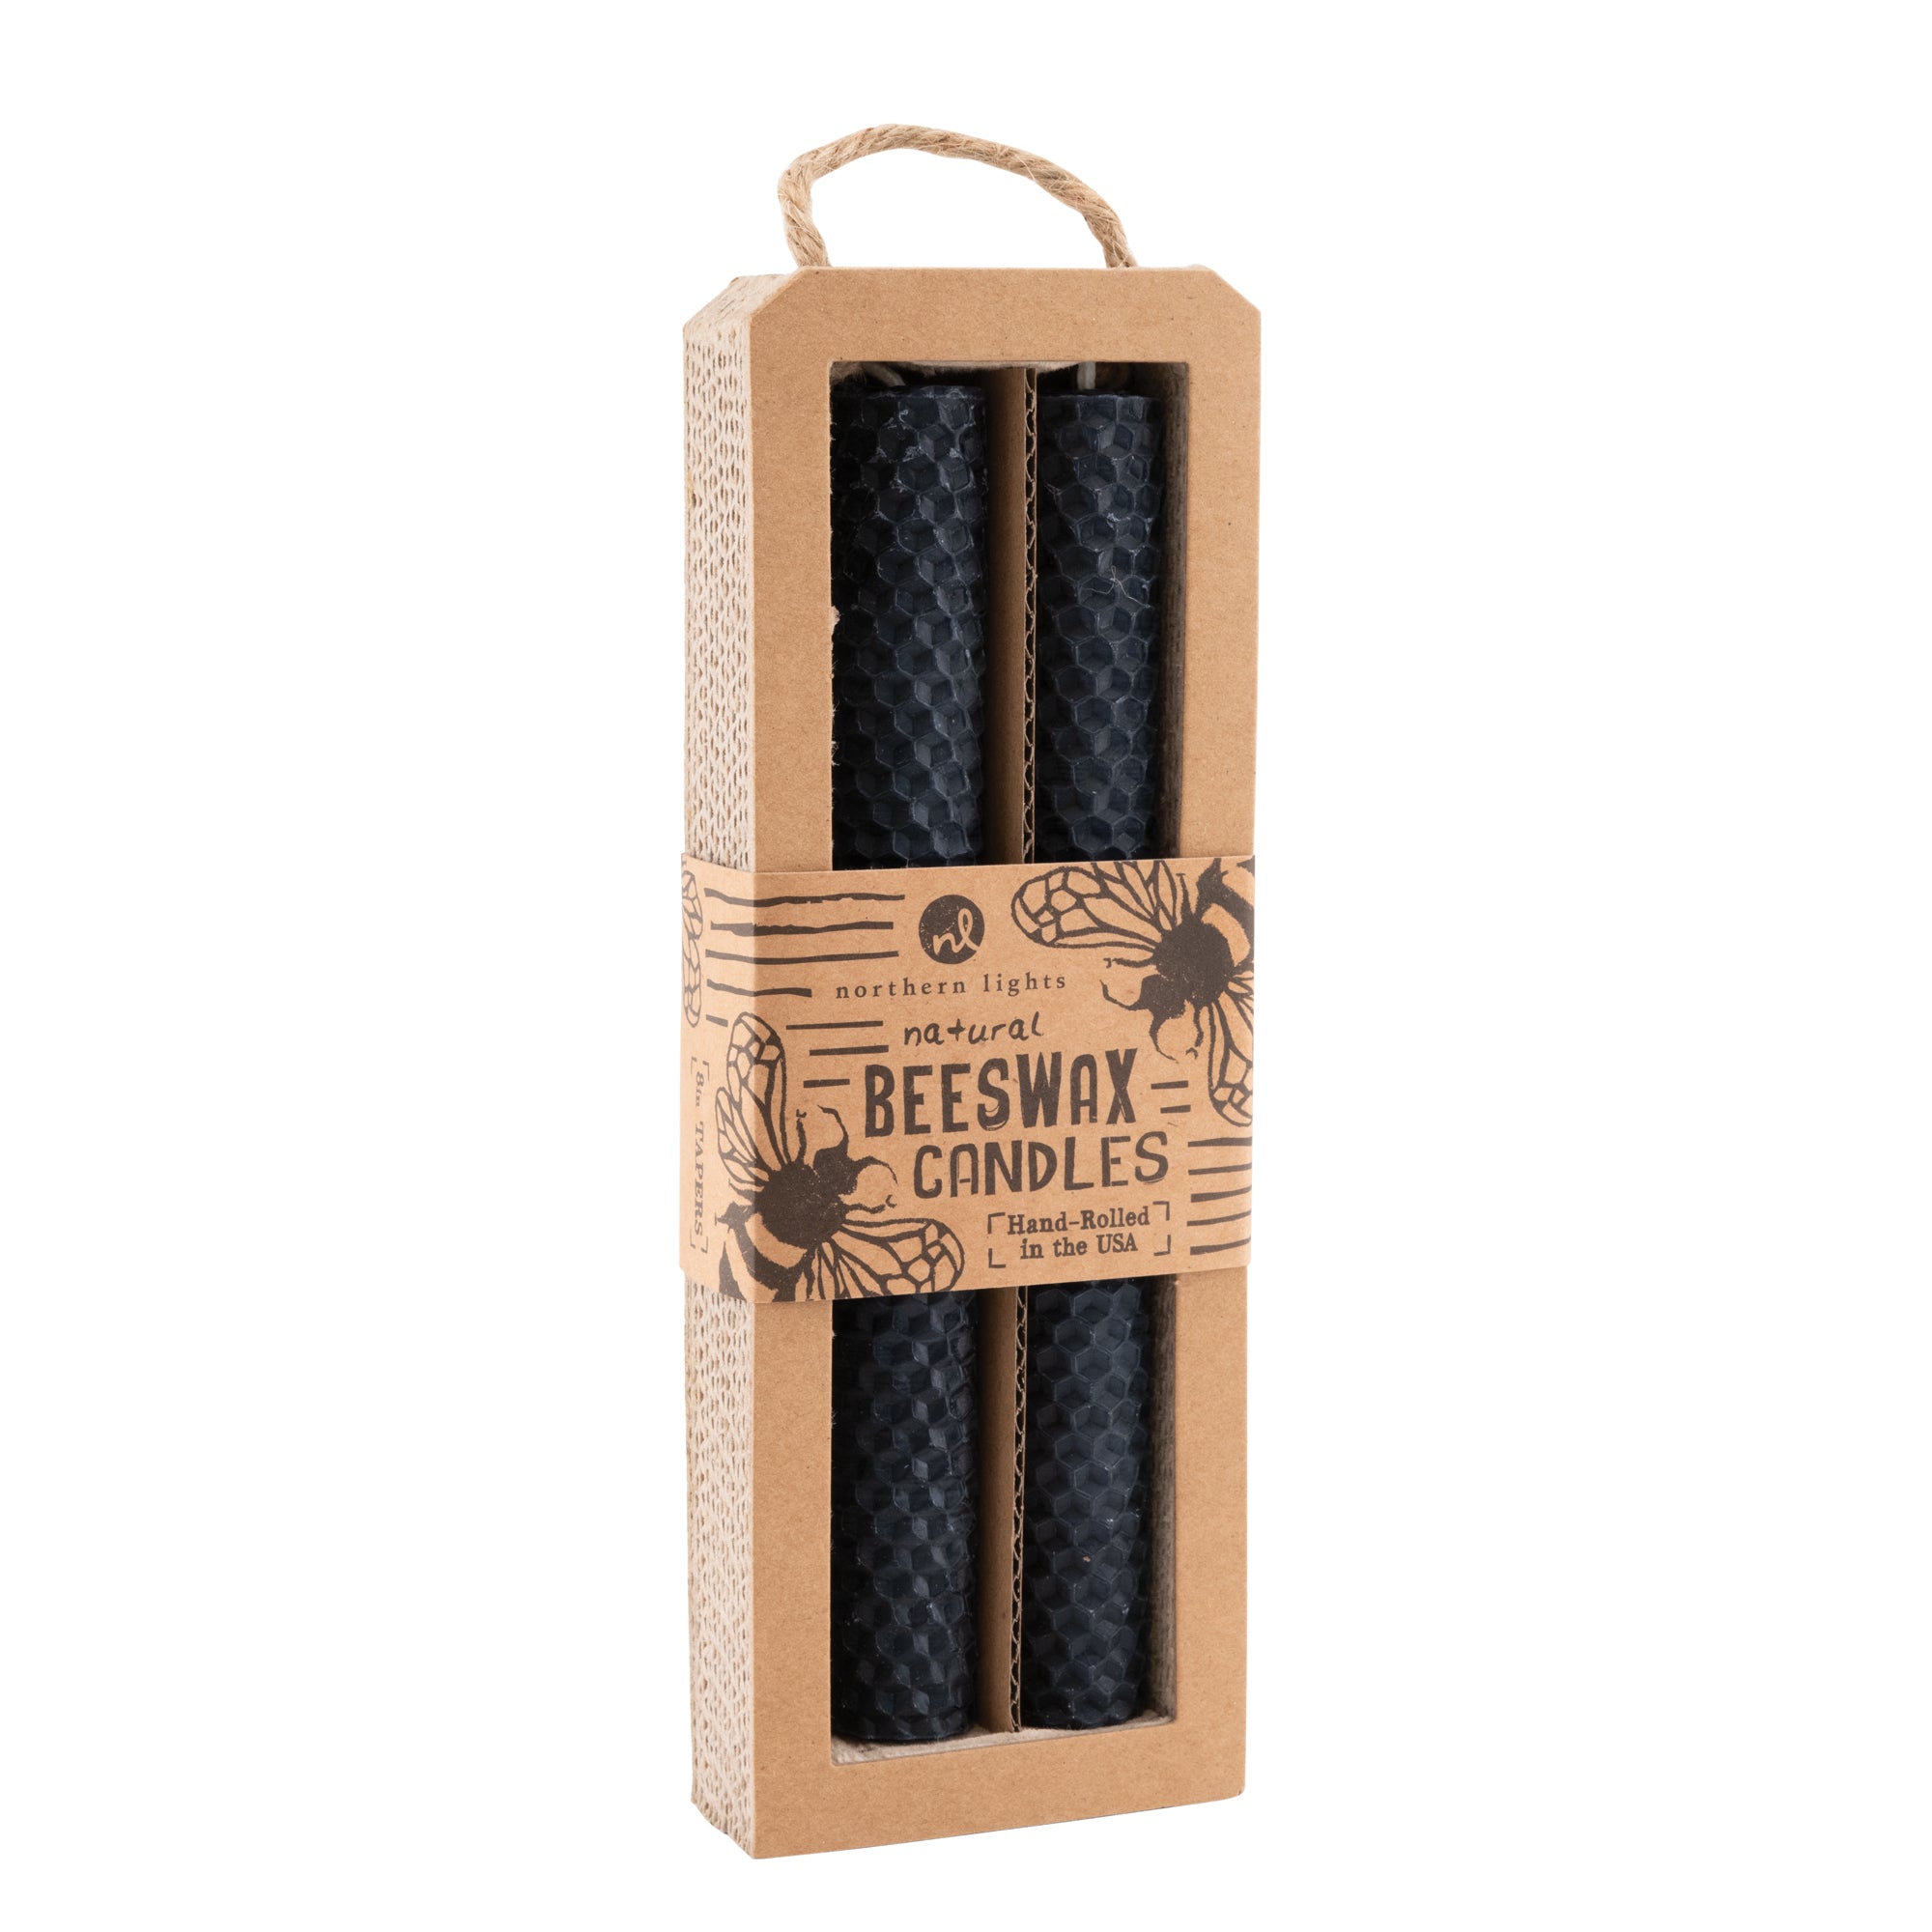 Bee Hive - Beeswax Tapers 2pc – Northern Lights Candles